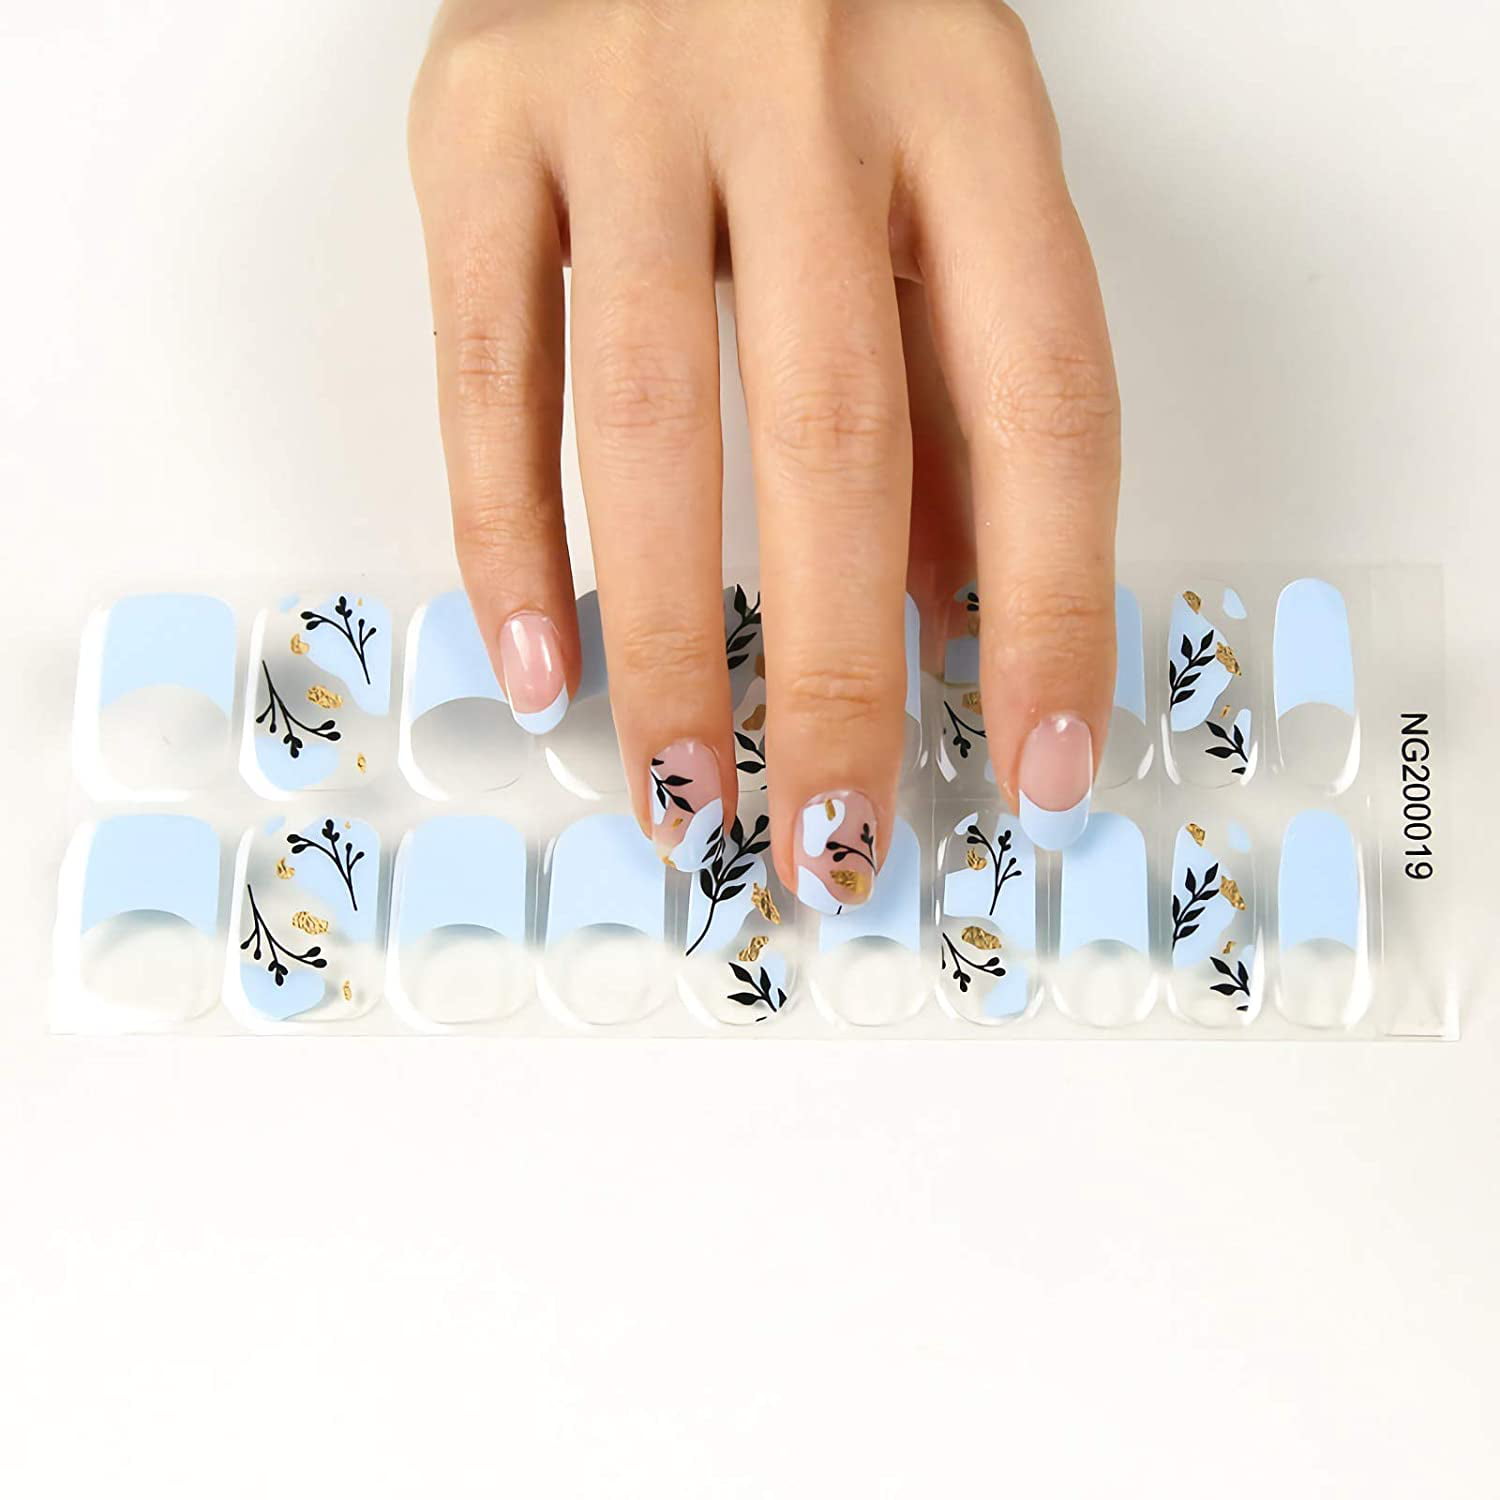 Christmas Gel Nail Wraps No UV light Required 20 Strips Buy 3 get 1 free!